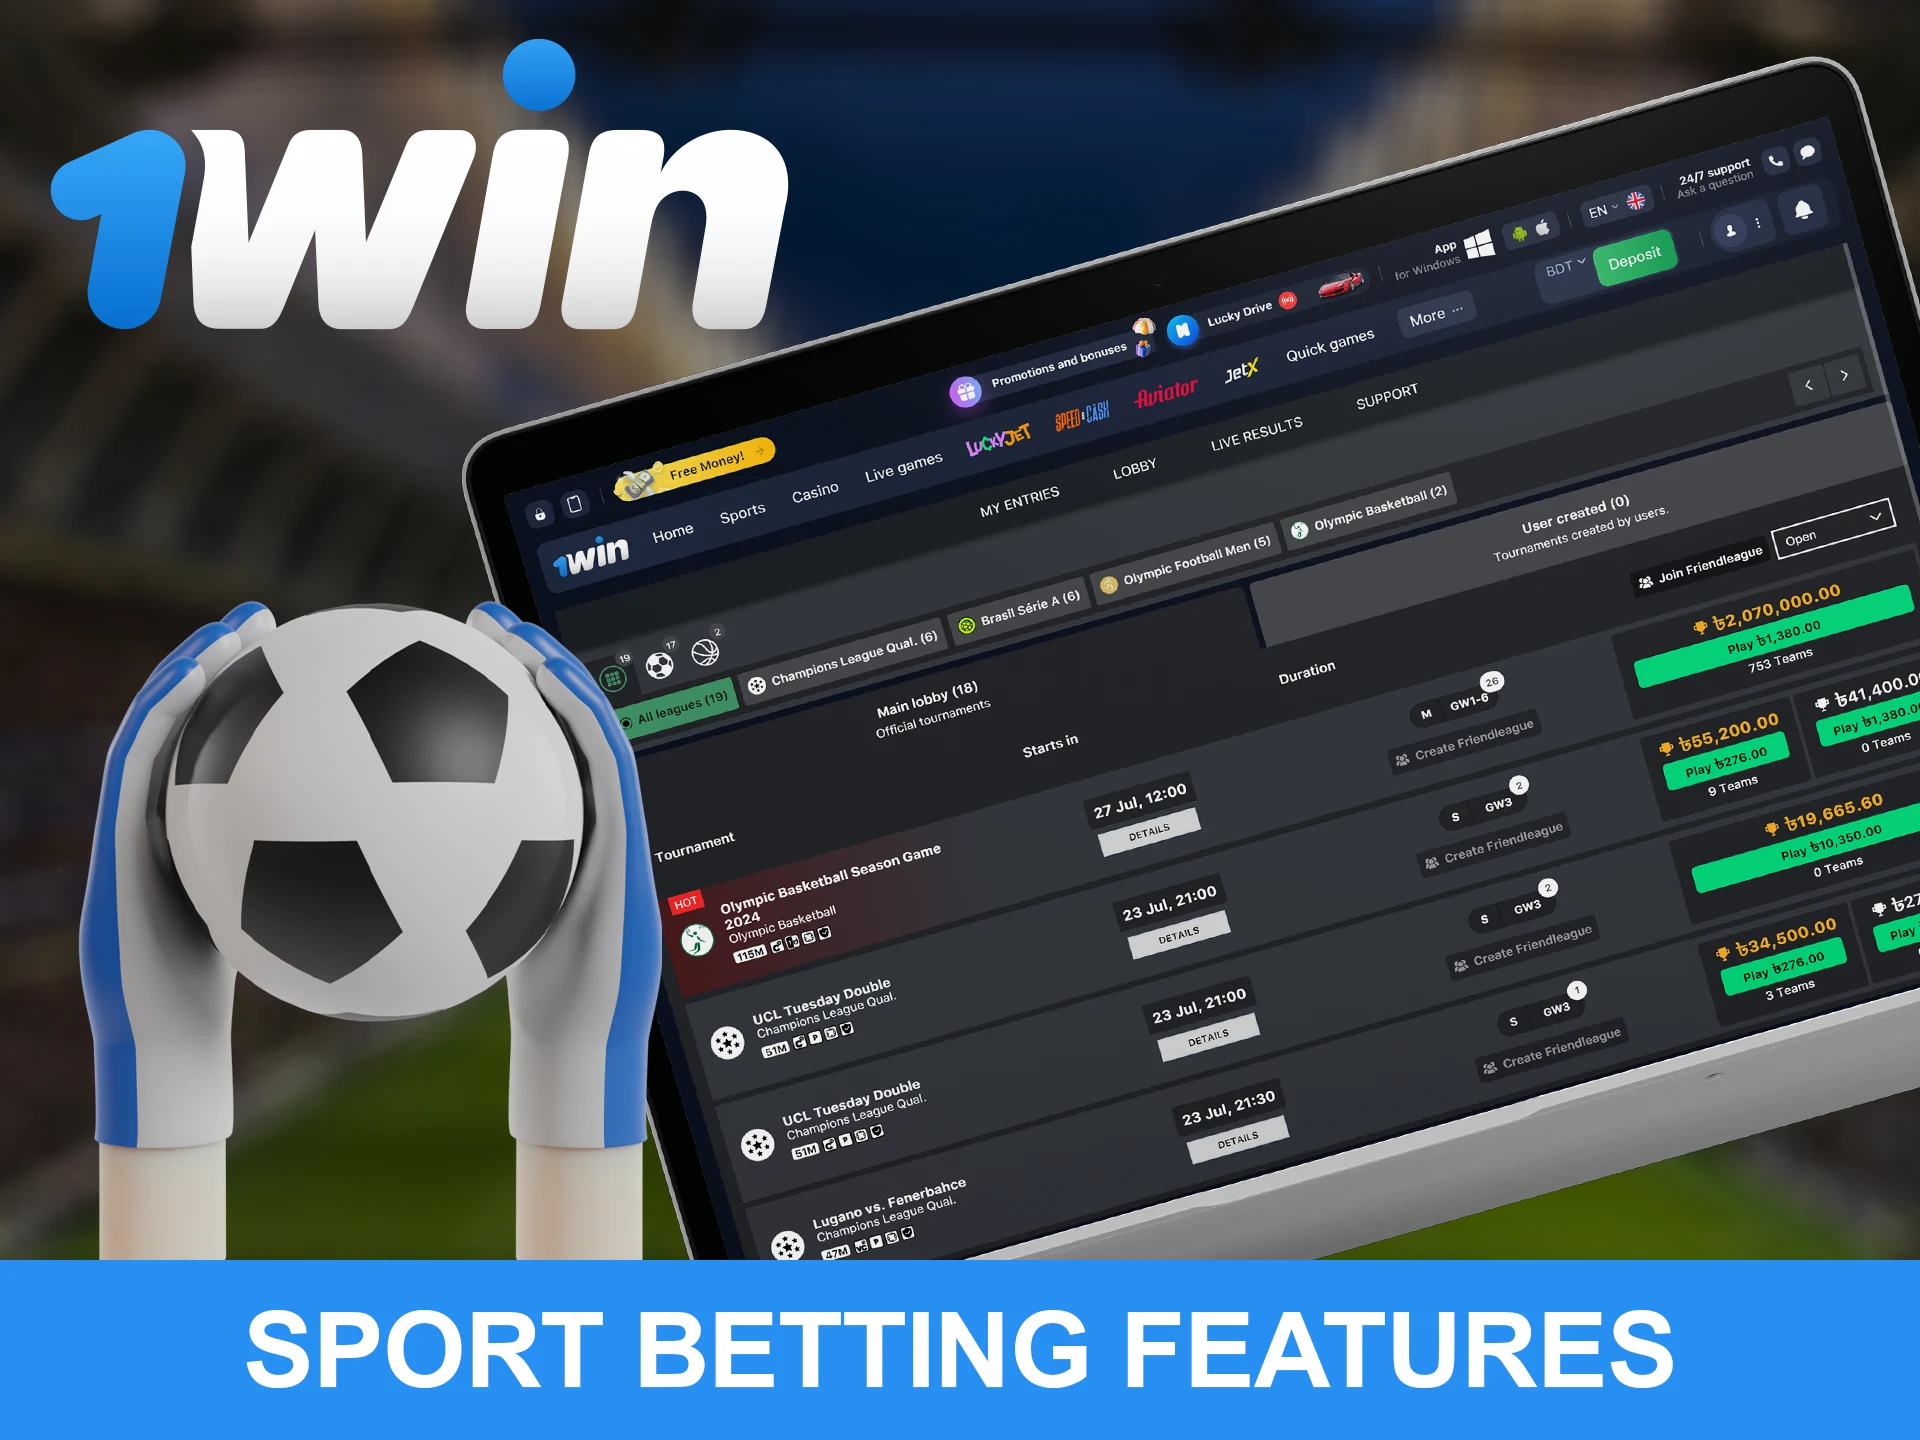 Familiarize yourself with the features of betting at 1win.